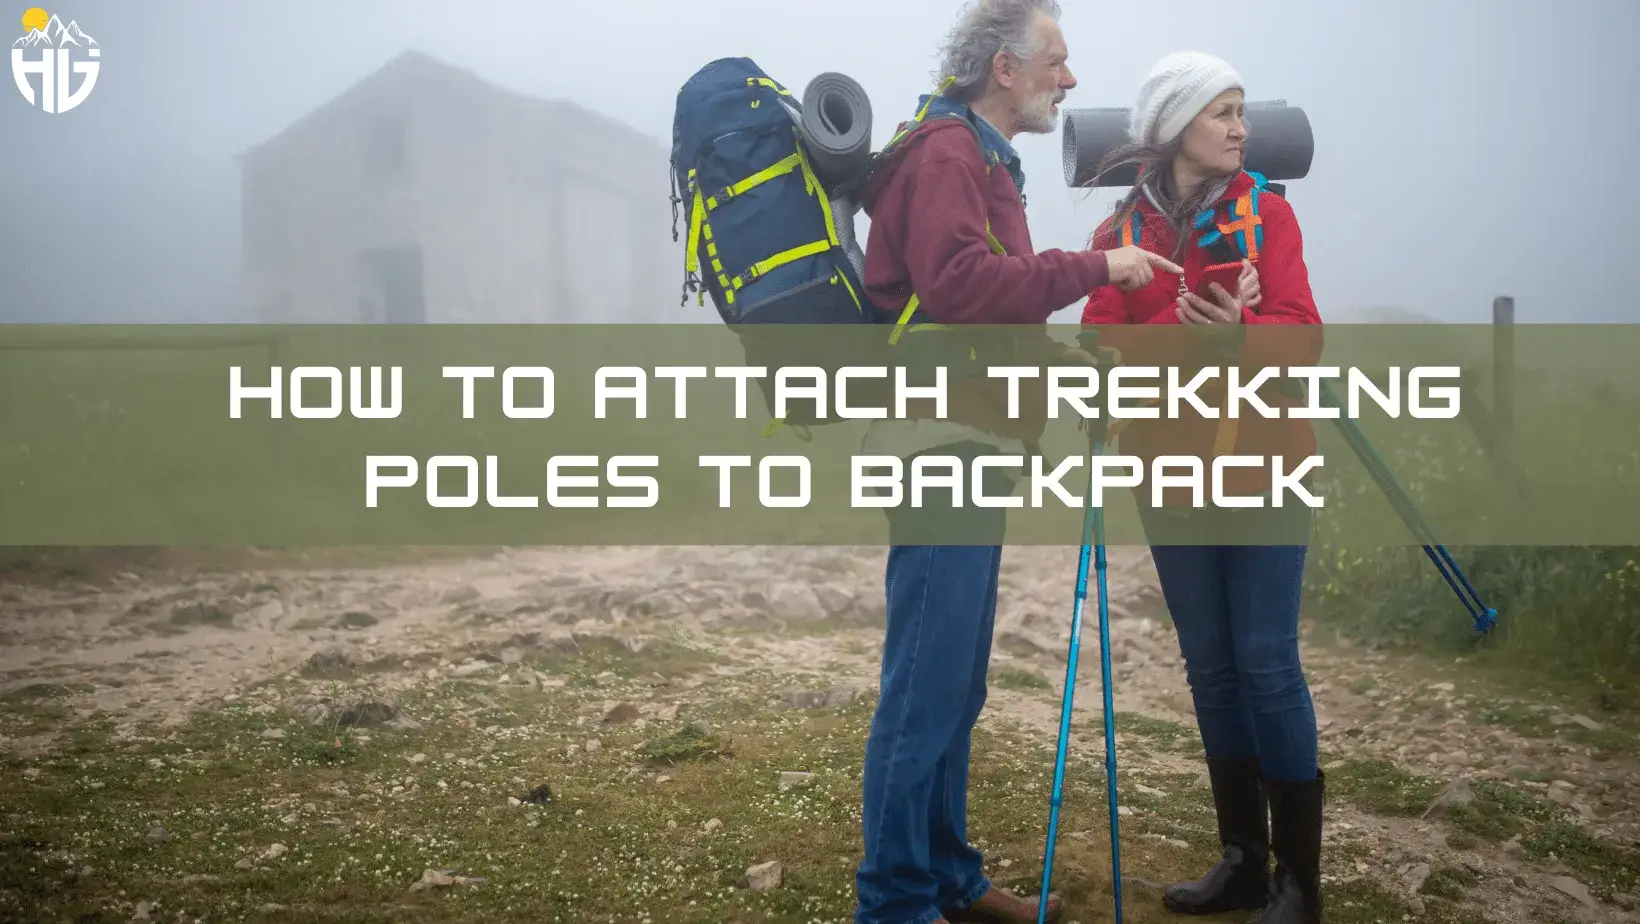 How to Attach Trekking Poles to Backpack